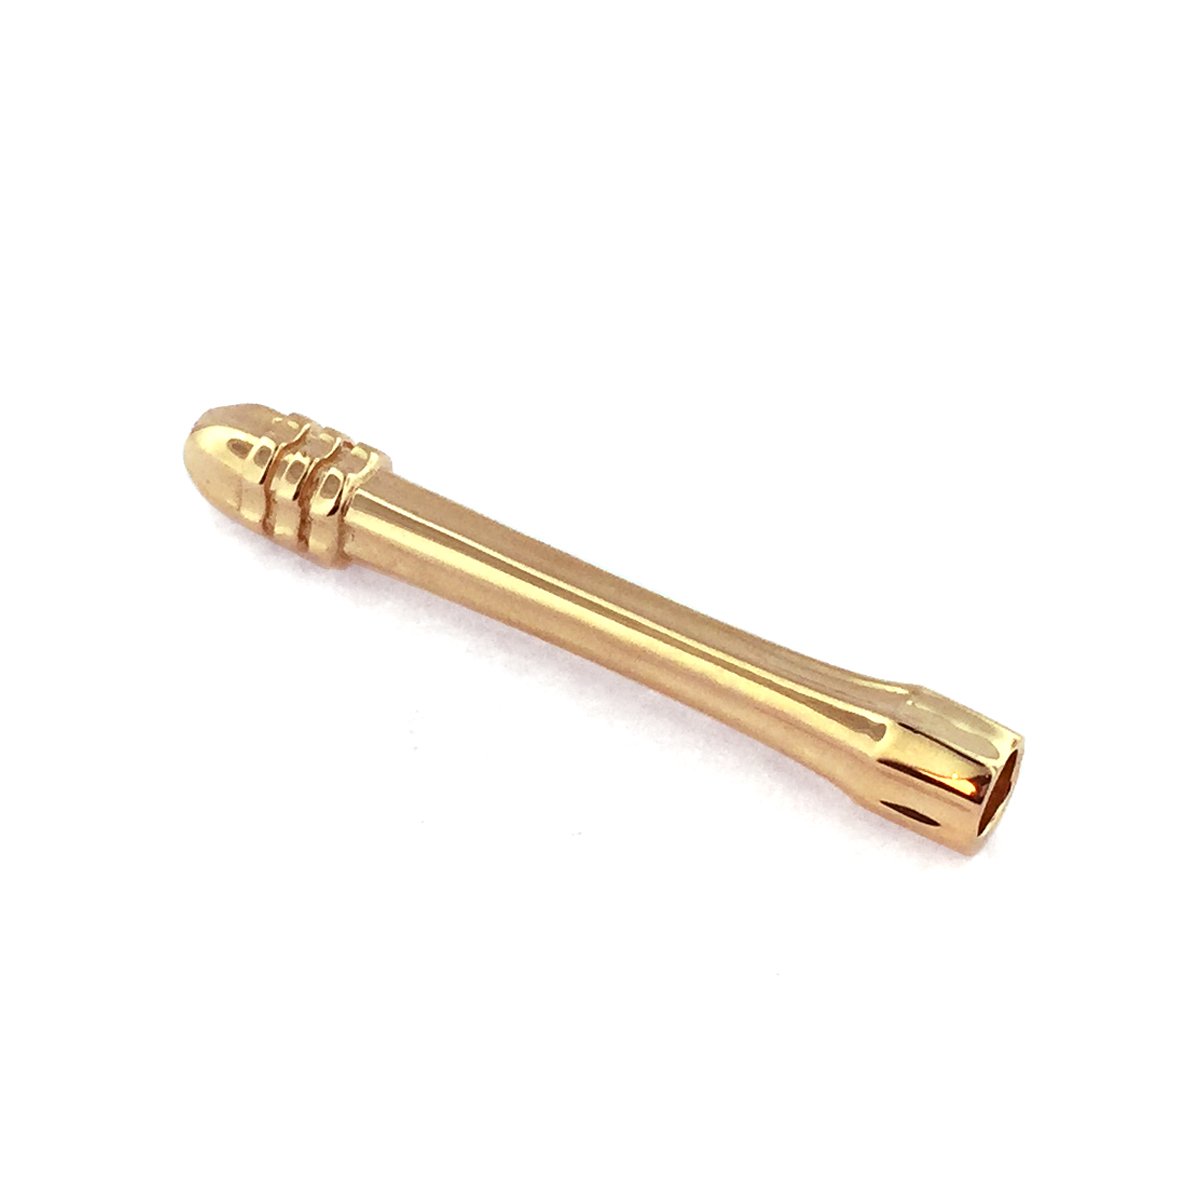 https://assets.bigcartel.com/product_images/151355848/Green_as_Gold_Signature_SMoking_Pipe_slant_view.jpg